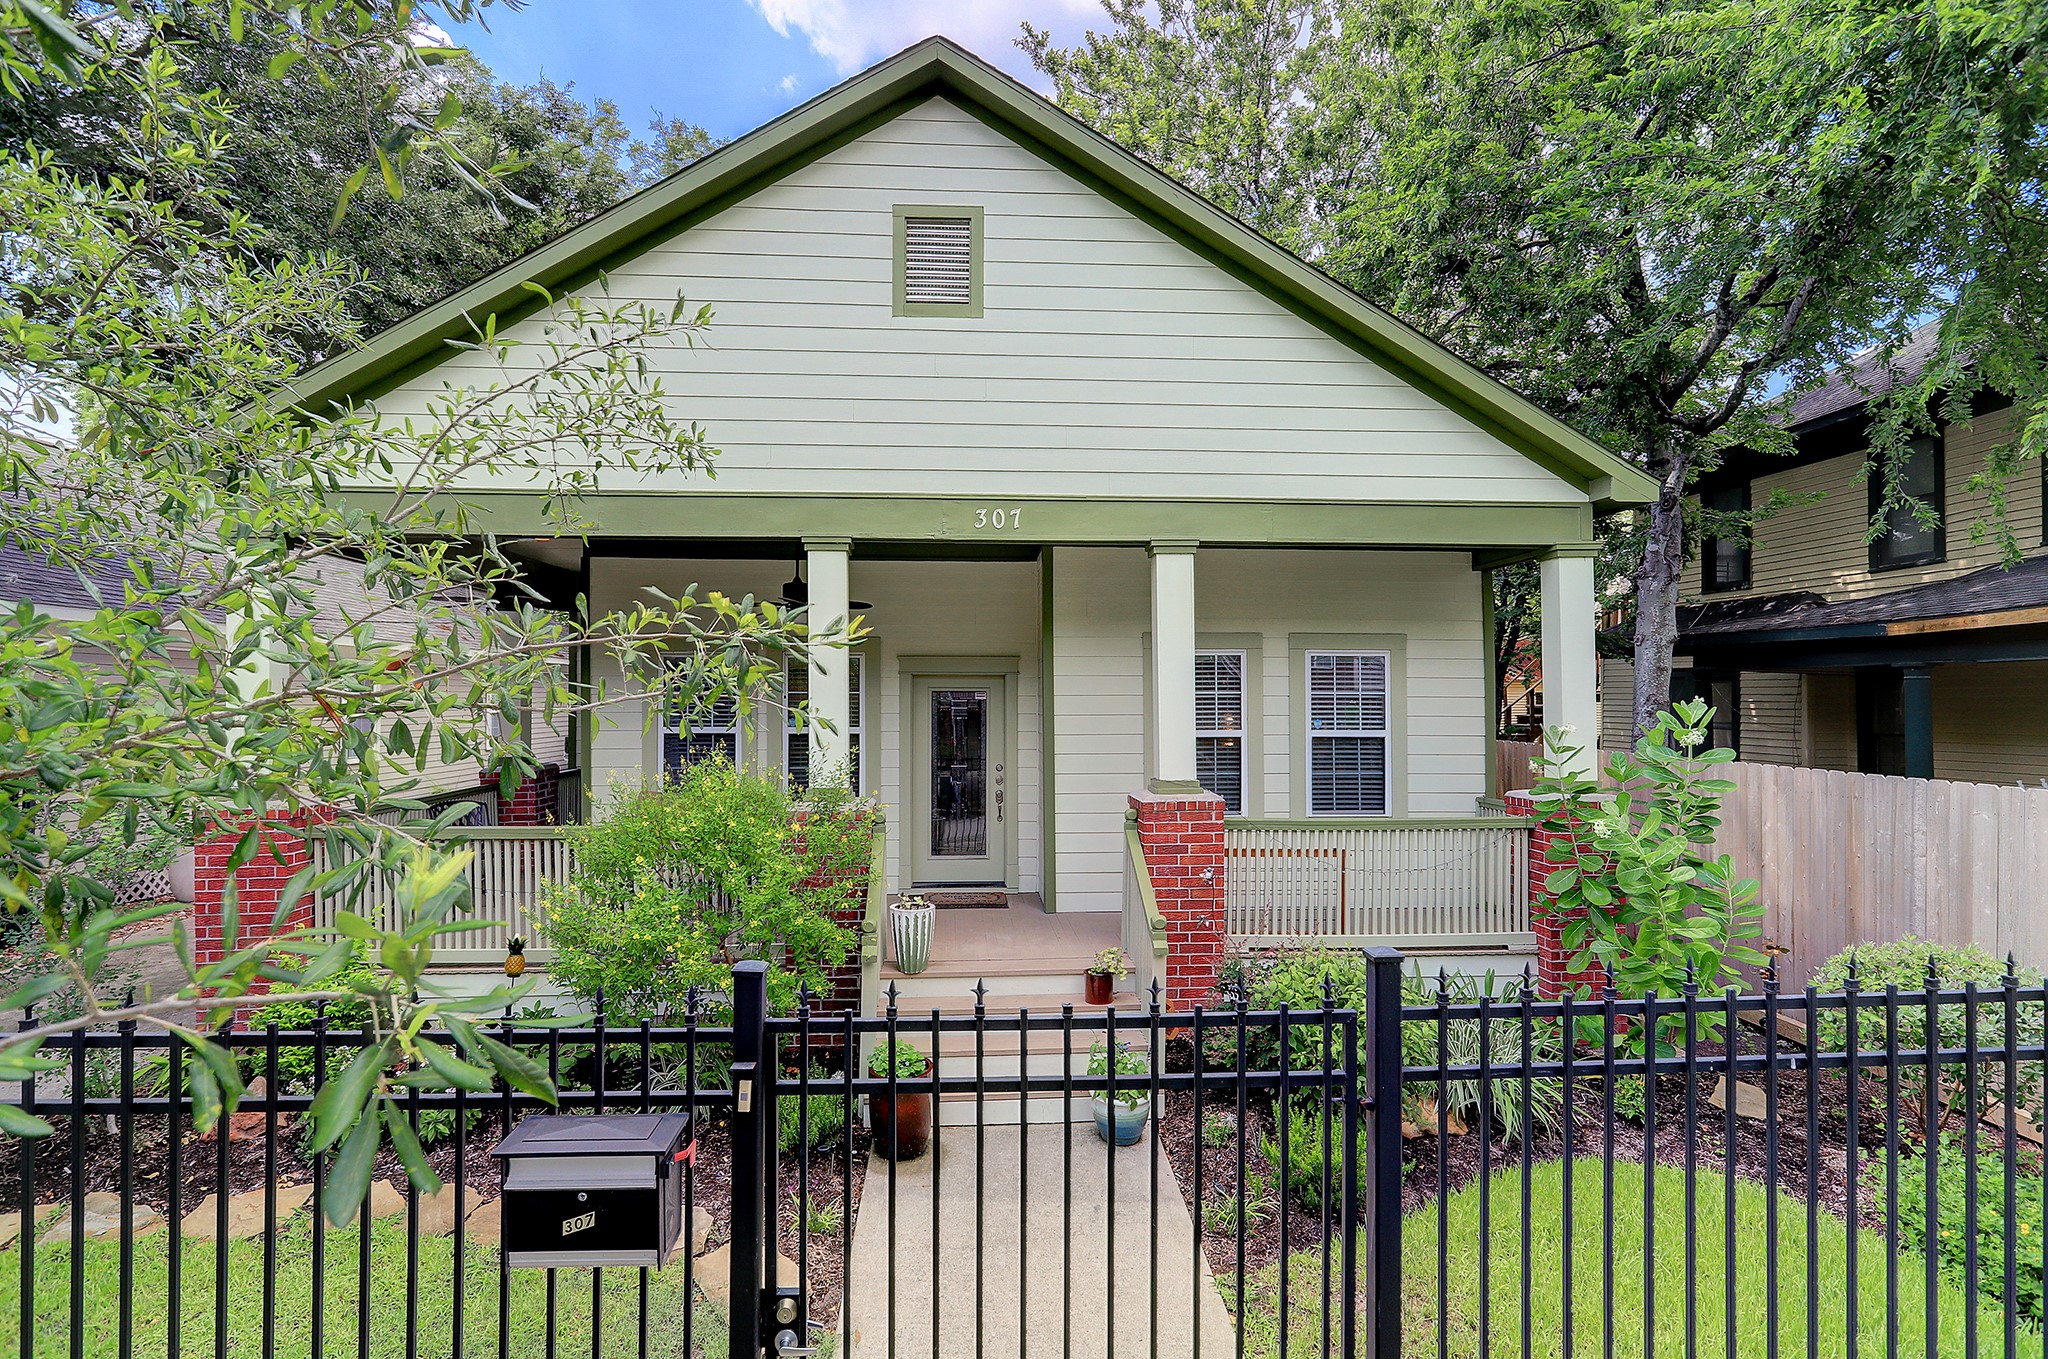 This Montrose gem makes a great first impression with its wrought-iron gate, well-manicured and landscaped front yard and its charming exterior façade.